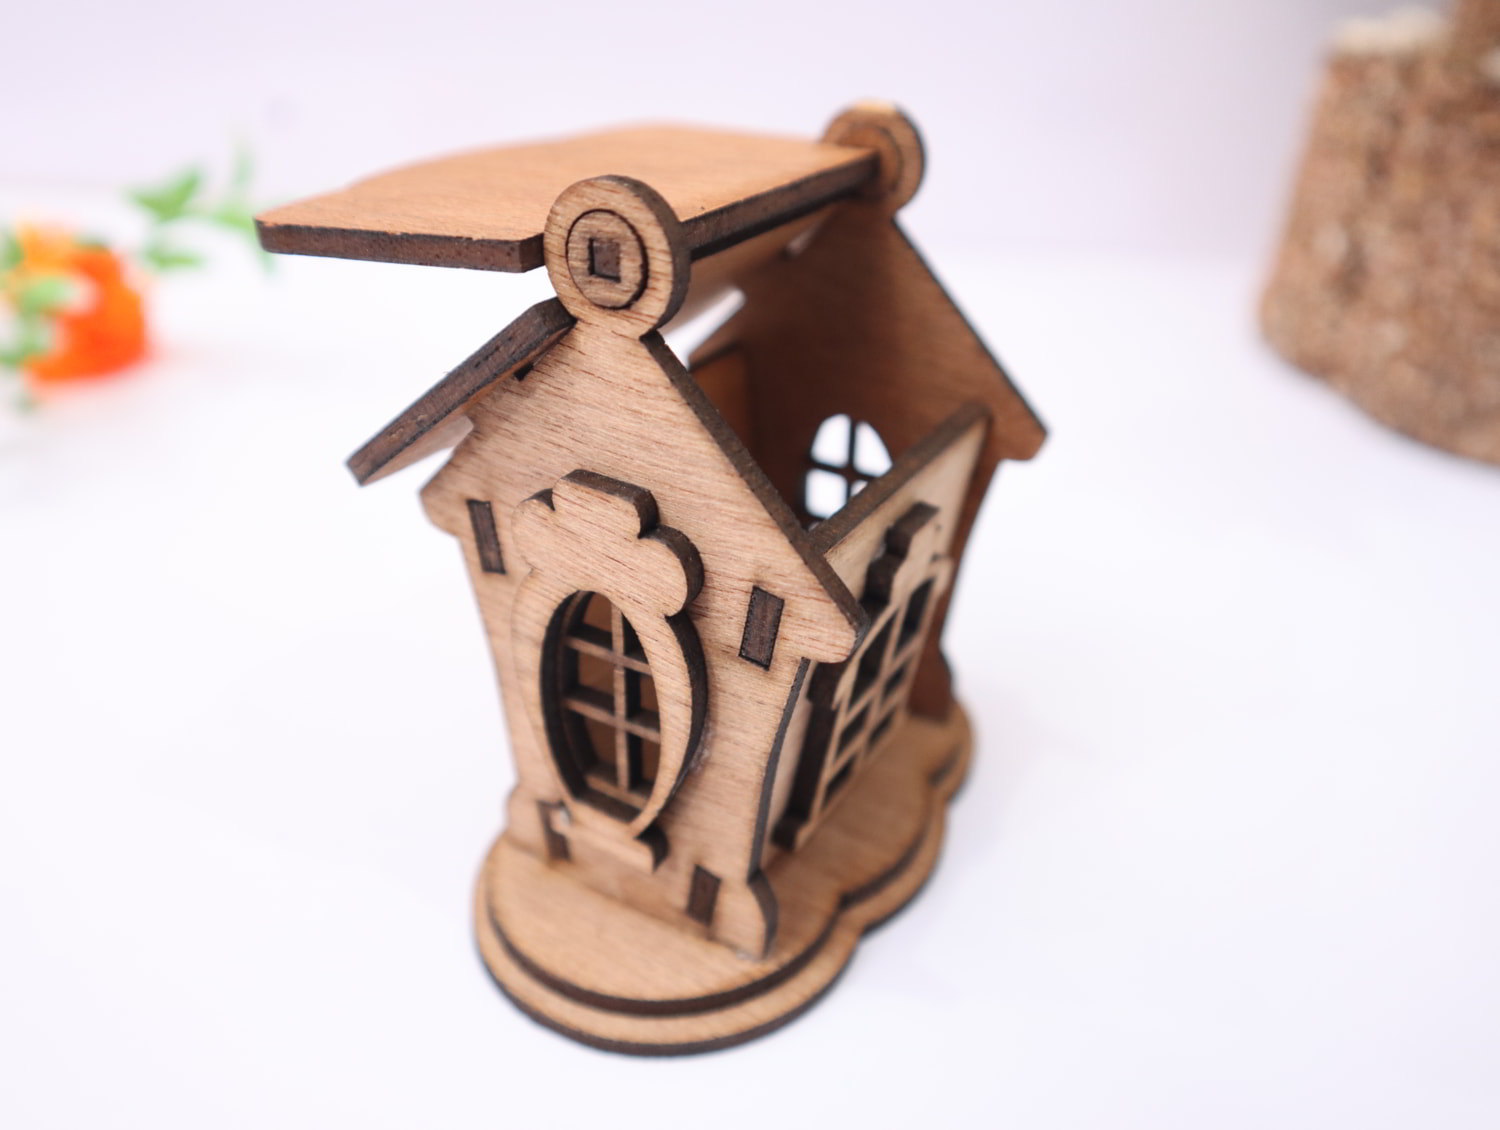 Laser Cut House Shaped Box 3mm Free Vector